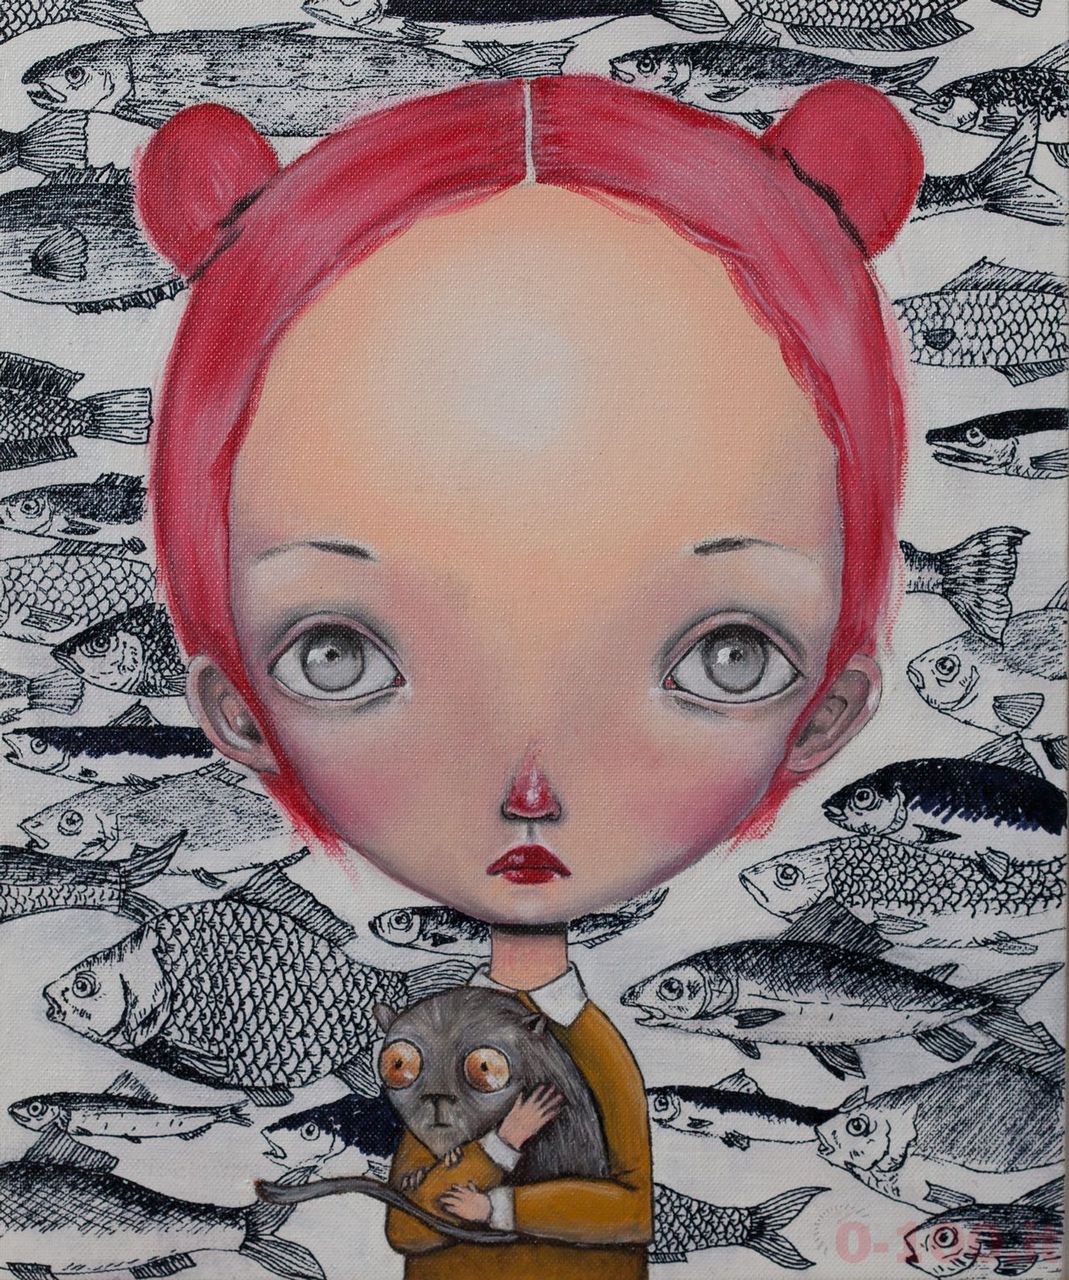 2013_Sabrina_Dan_I WILL PROTECT YOU FROM EVERYTHING EVIL_oil on canvas panel_30x25_0-100